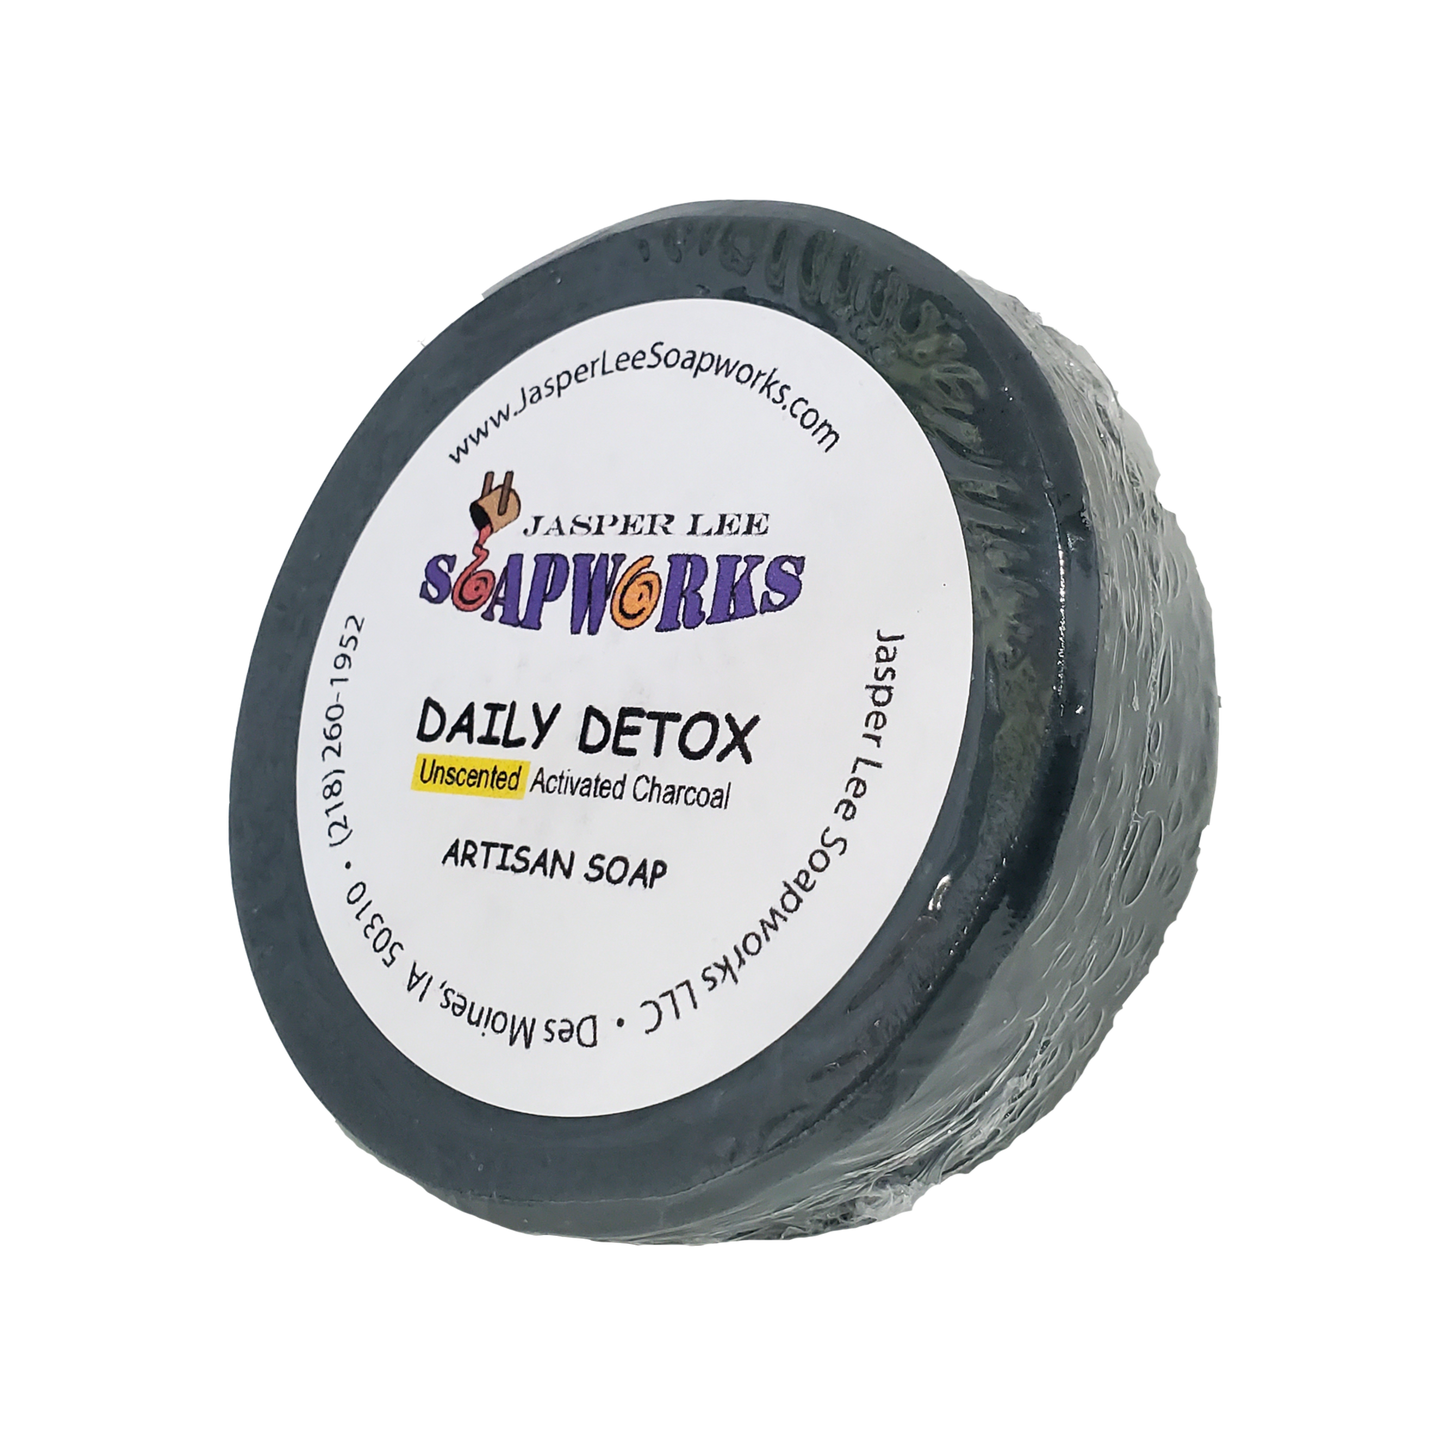 Unscented Daily Detox activated charcoal soap in biodegradable clear packaging